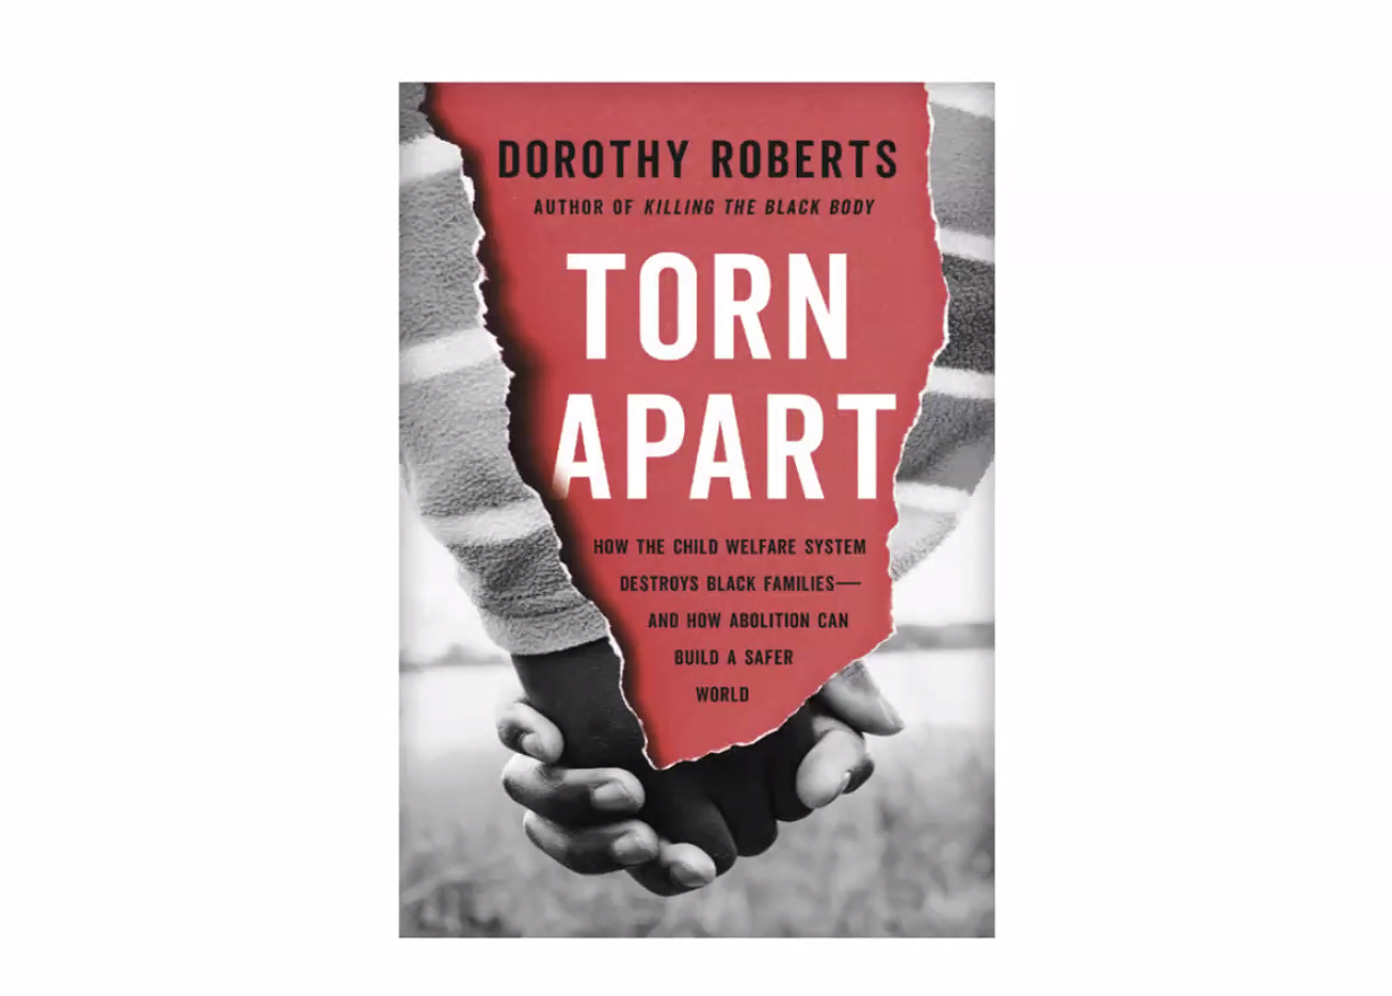 Book cover of "Torn Apart" by Dorothy Roberts